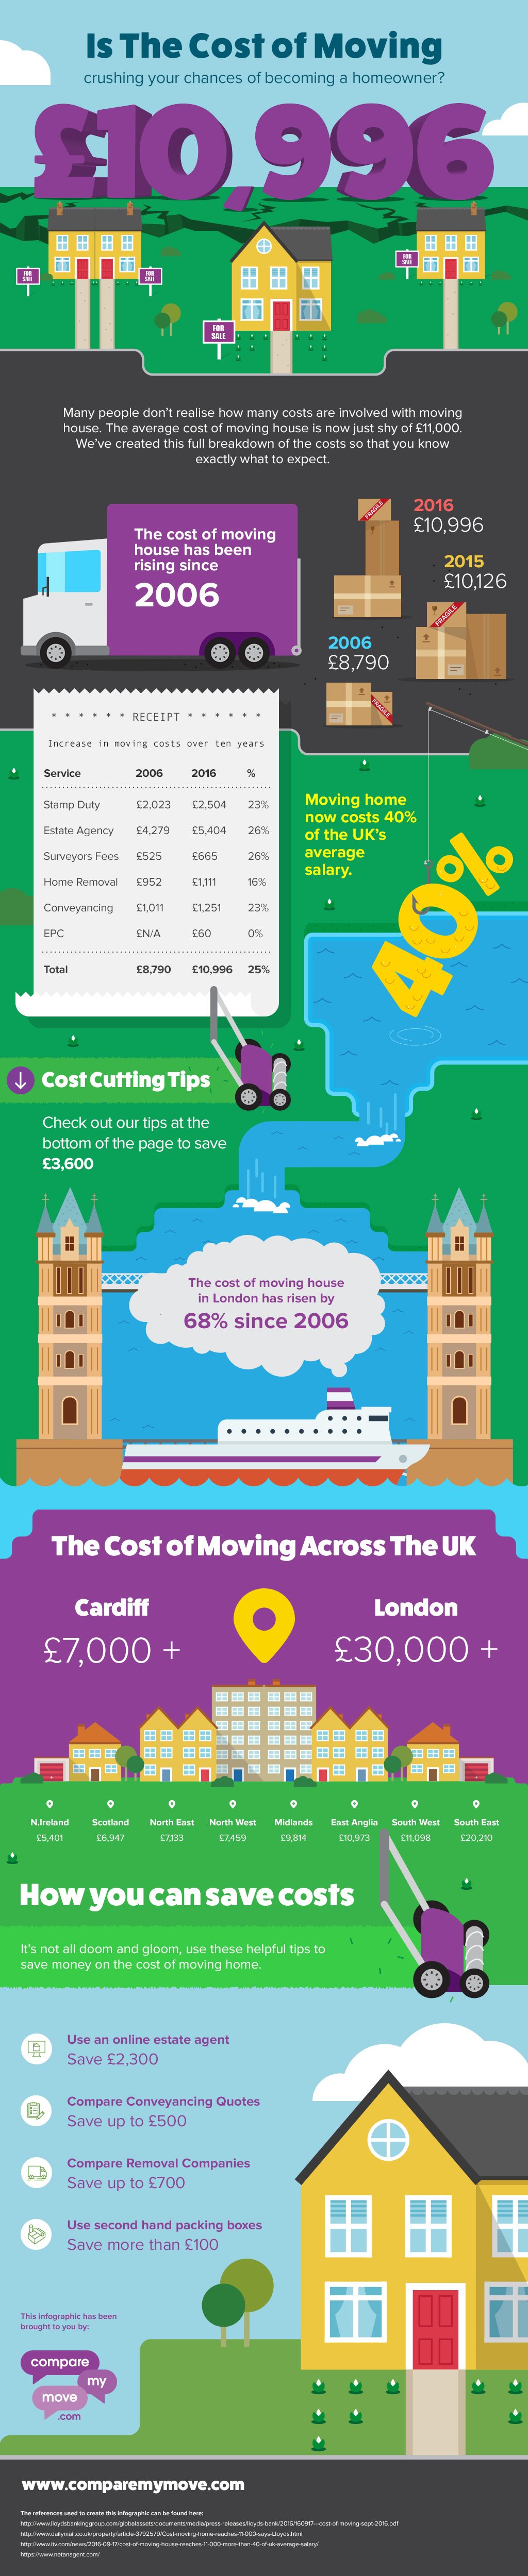 Moving House Infographic by Compare My Move